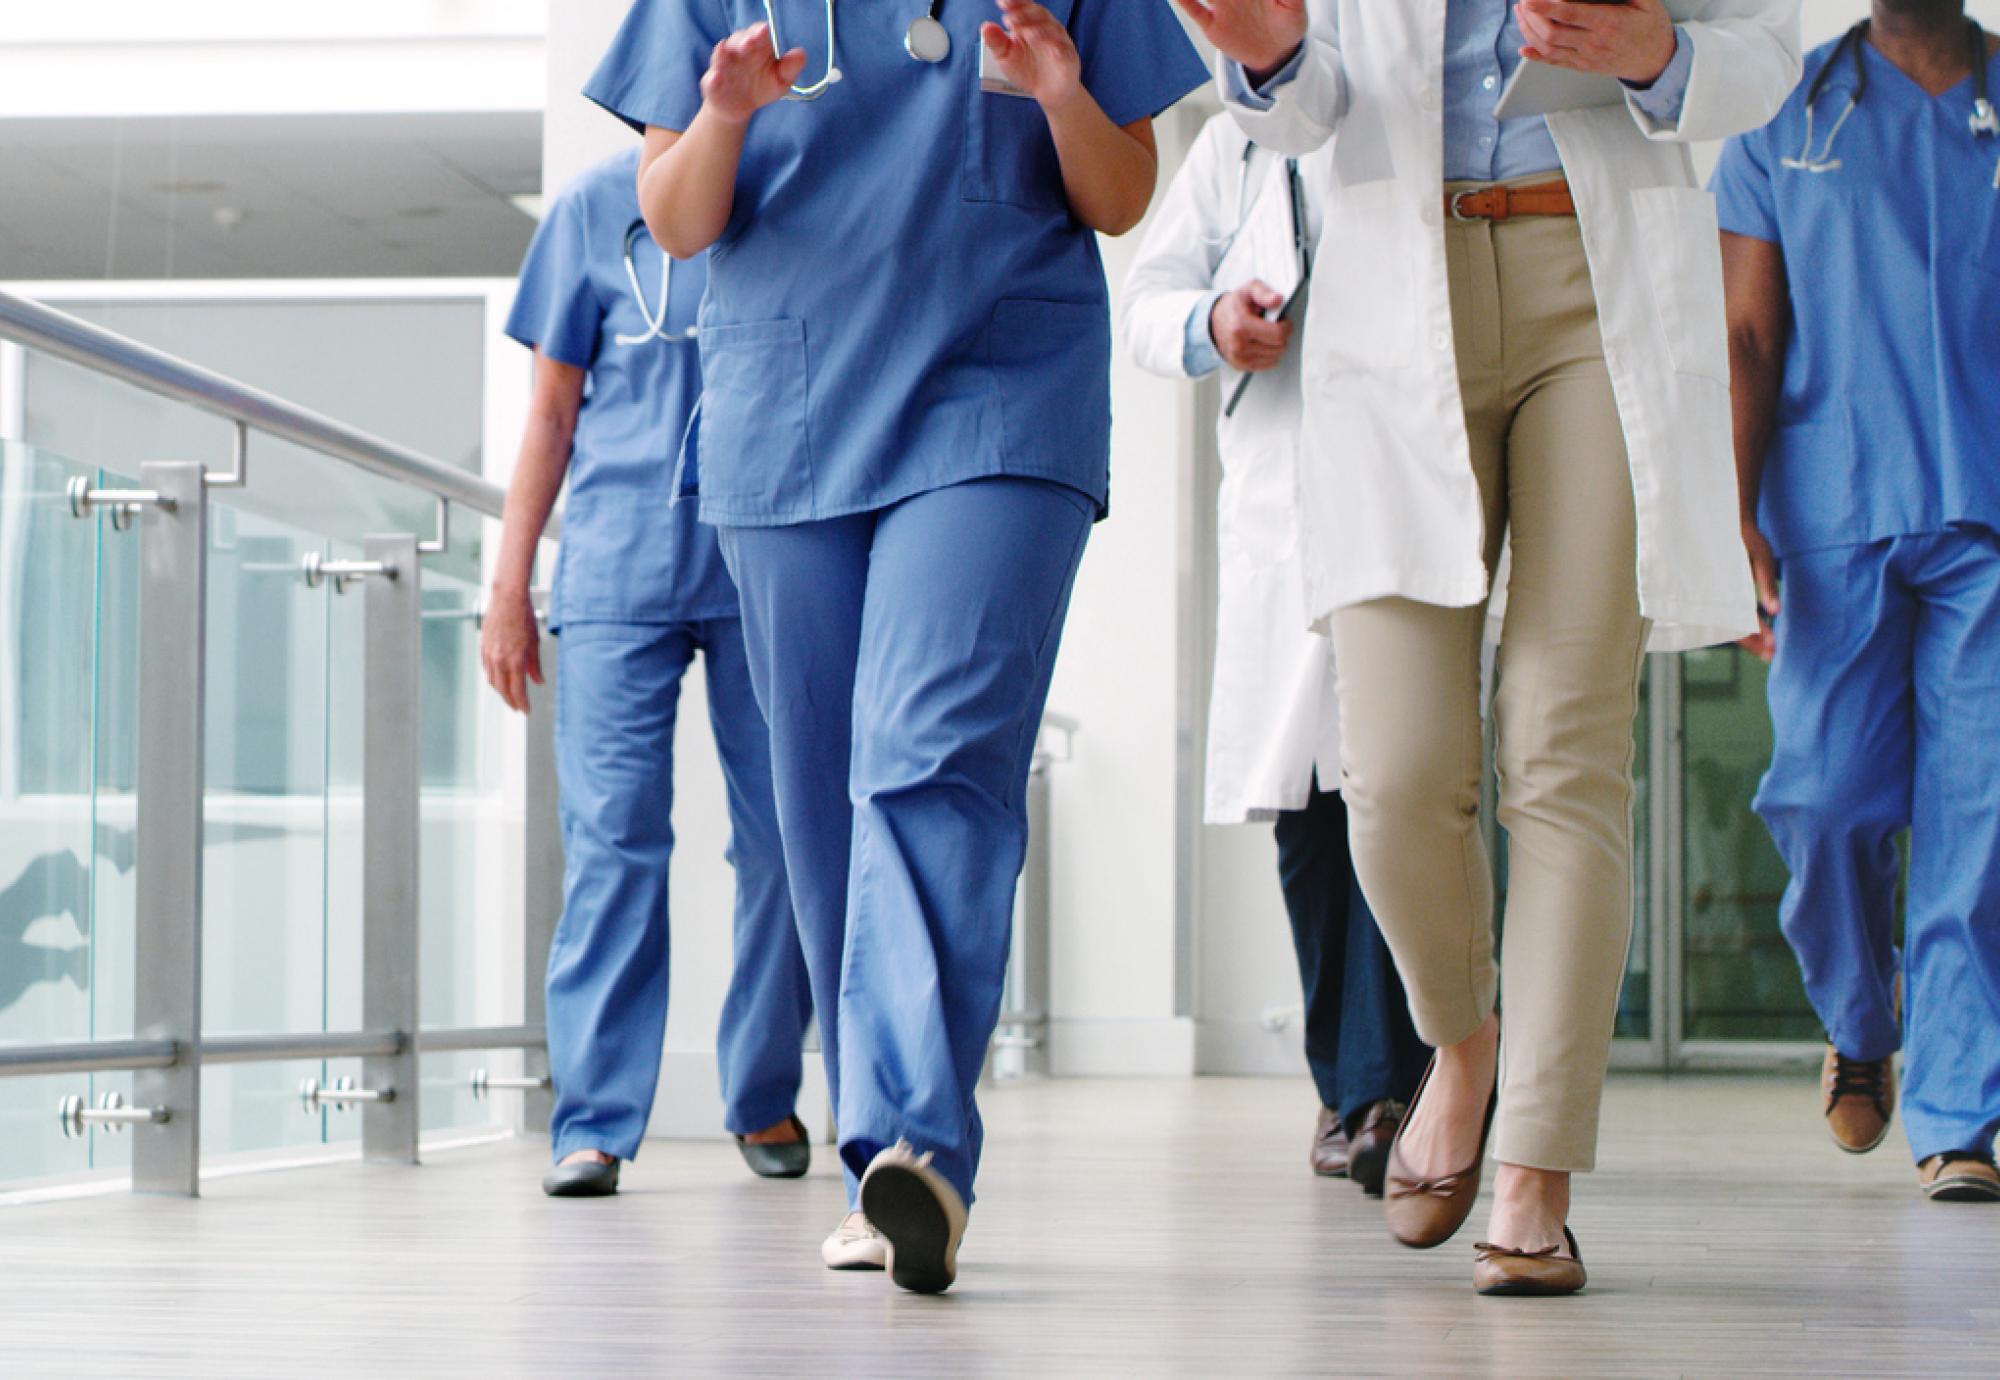 Image of the bottom half of healthcare workers walking down a corridor